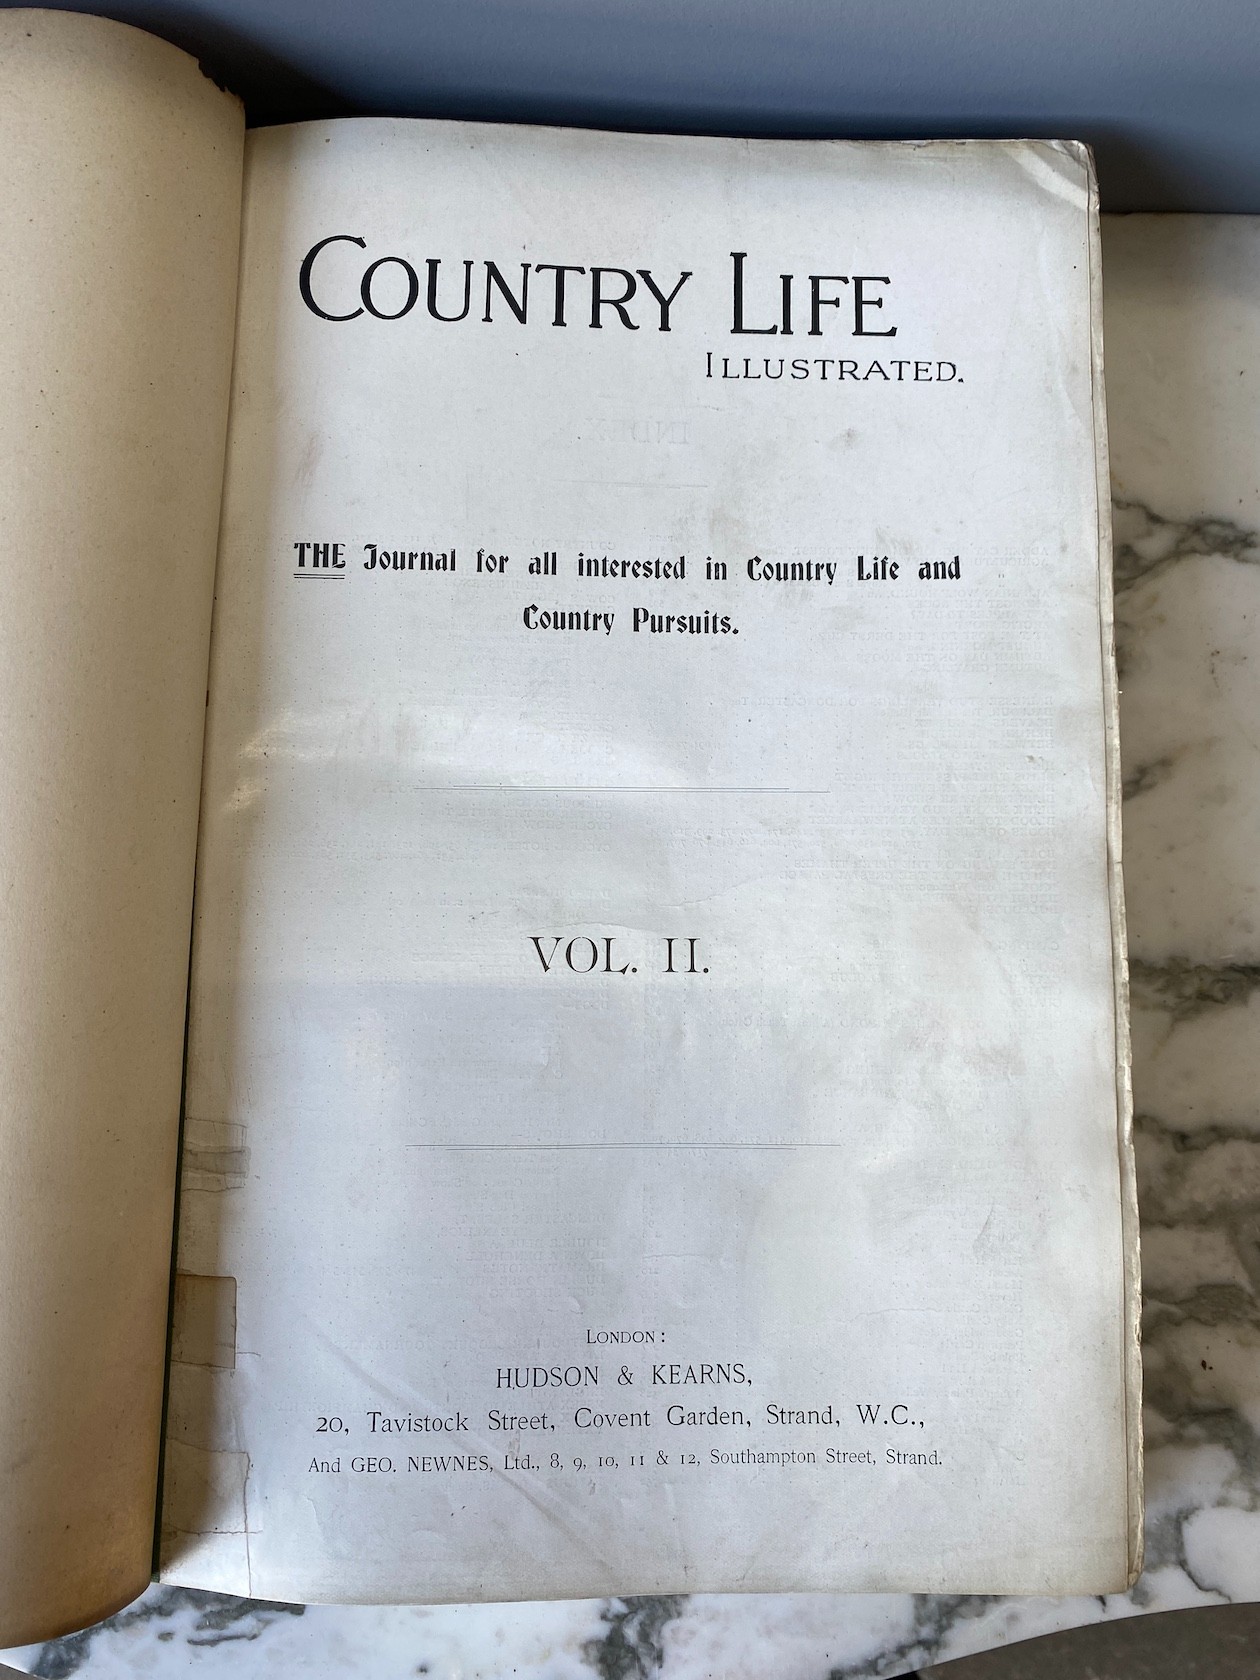 Country Life, vol.1-166 but lacking vol.34, 1897-1979 and various other later issues.